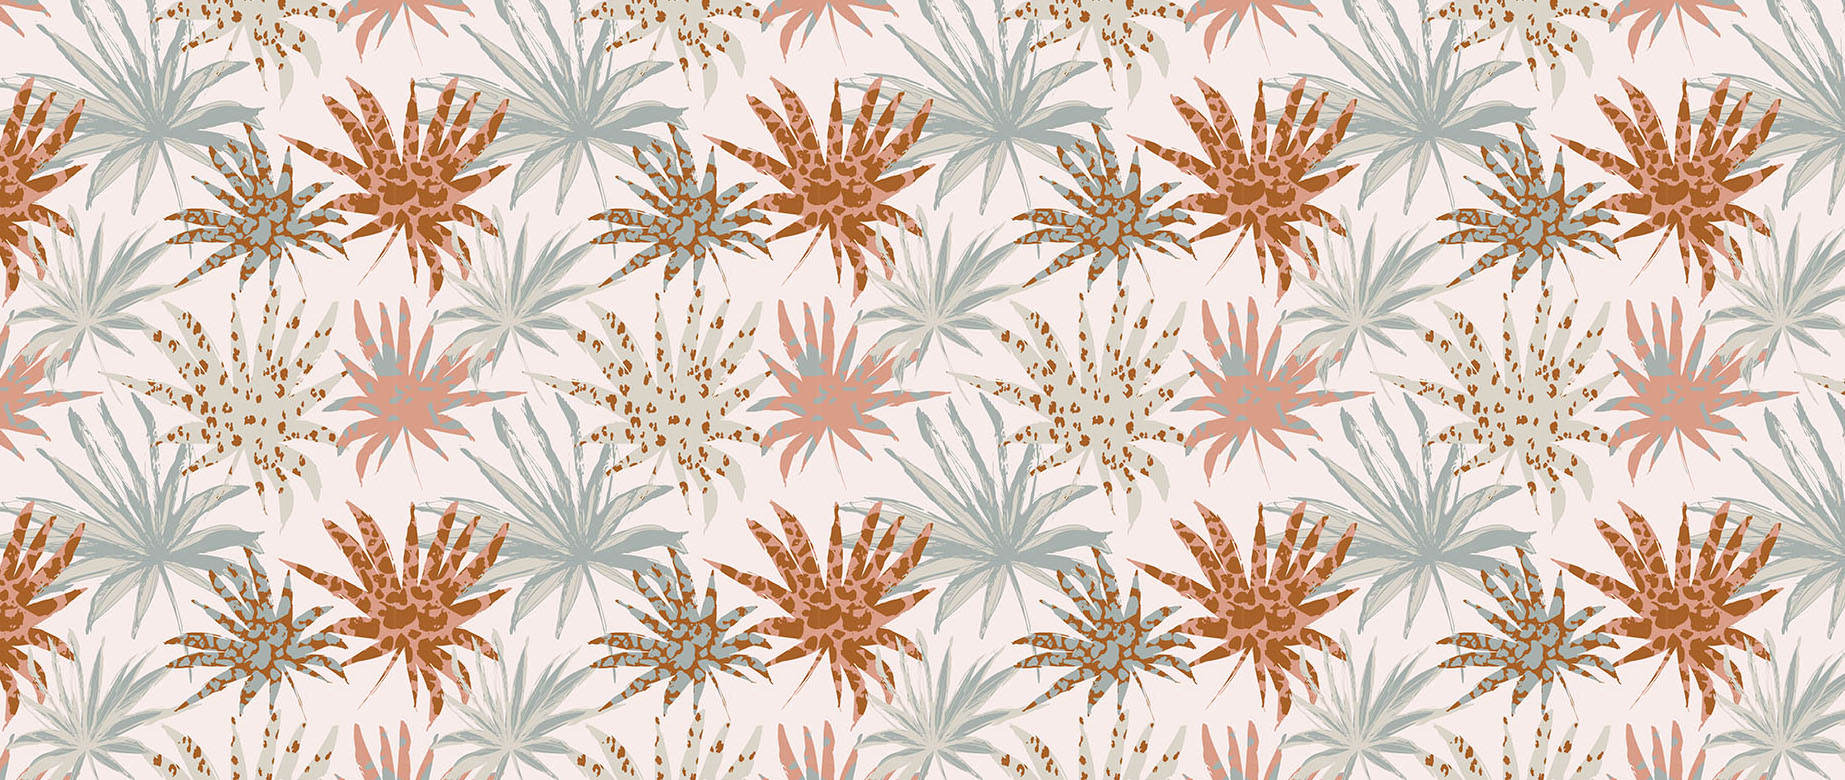 palm-leaves-in-modern-pattern-wallpaper-seamless-repeat-view